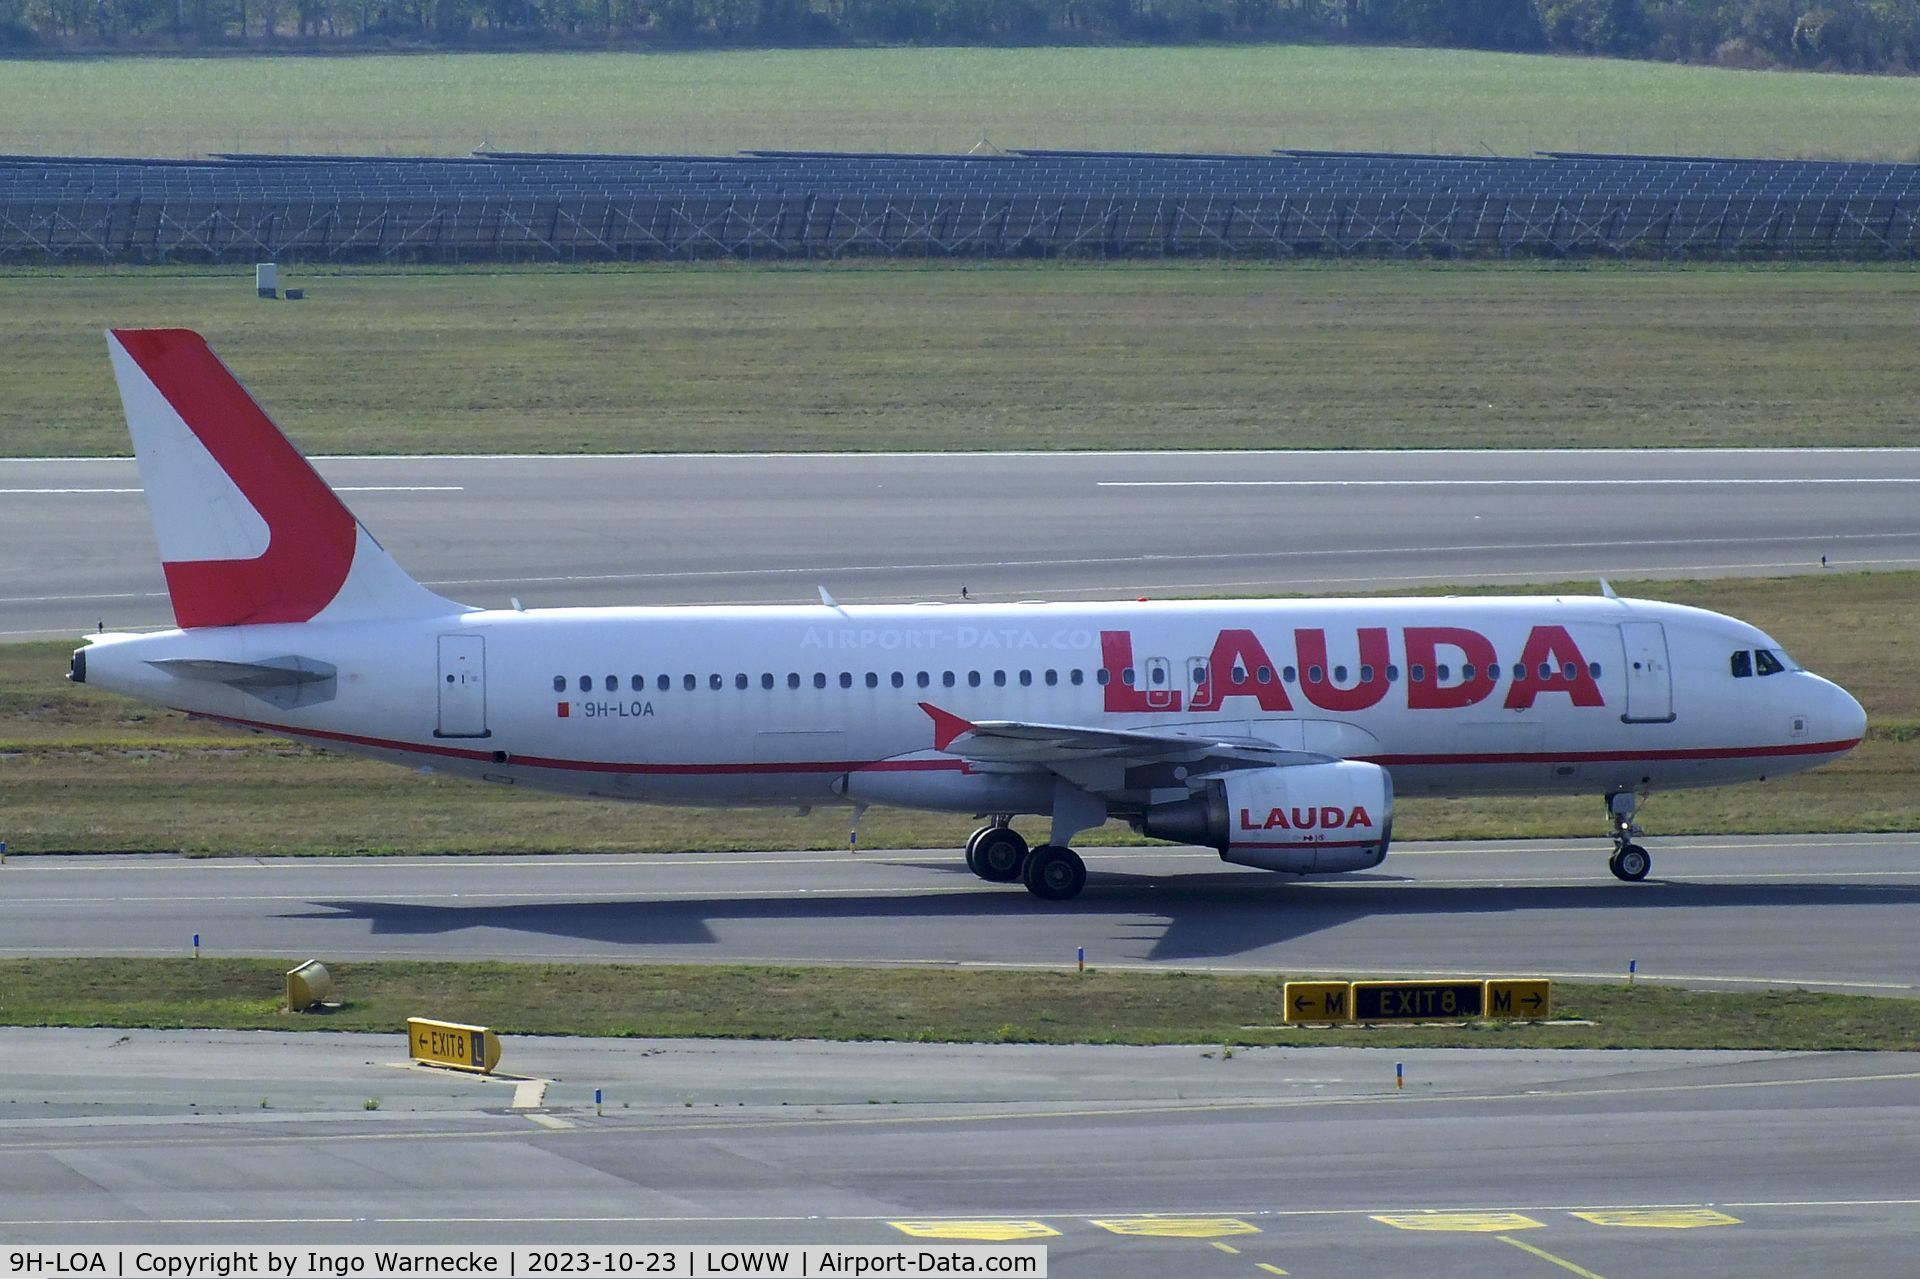 9H-LOA, 2007 Airbus A320-214 C/N 3147, Airbus A320-214 of Lauda Europe at Wien-Schwechat airport